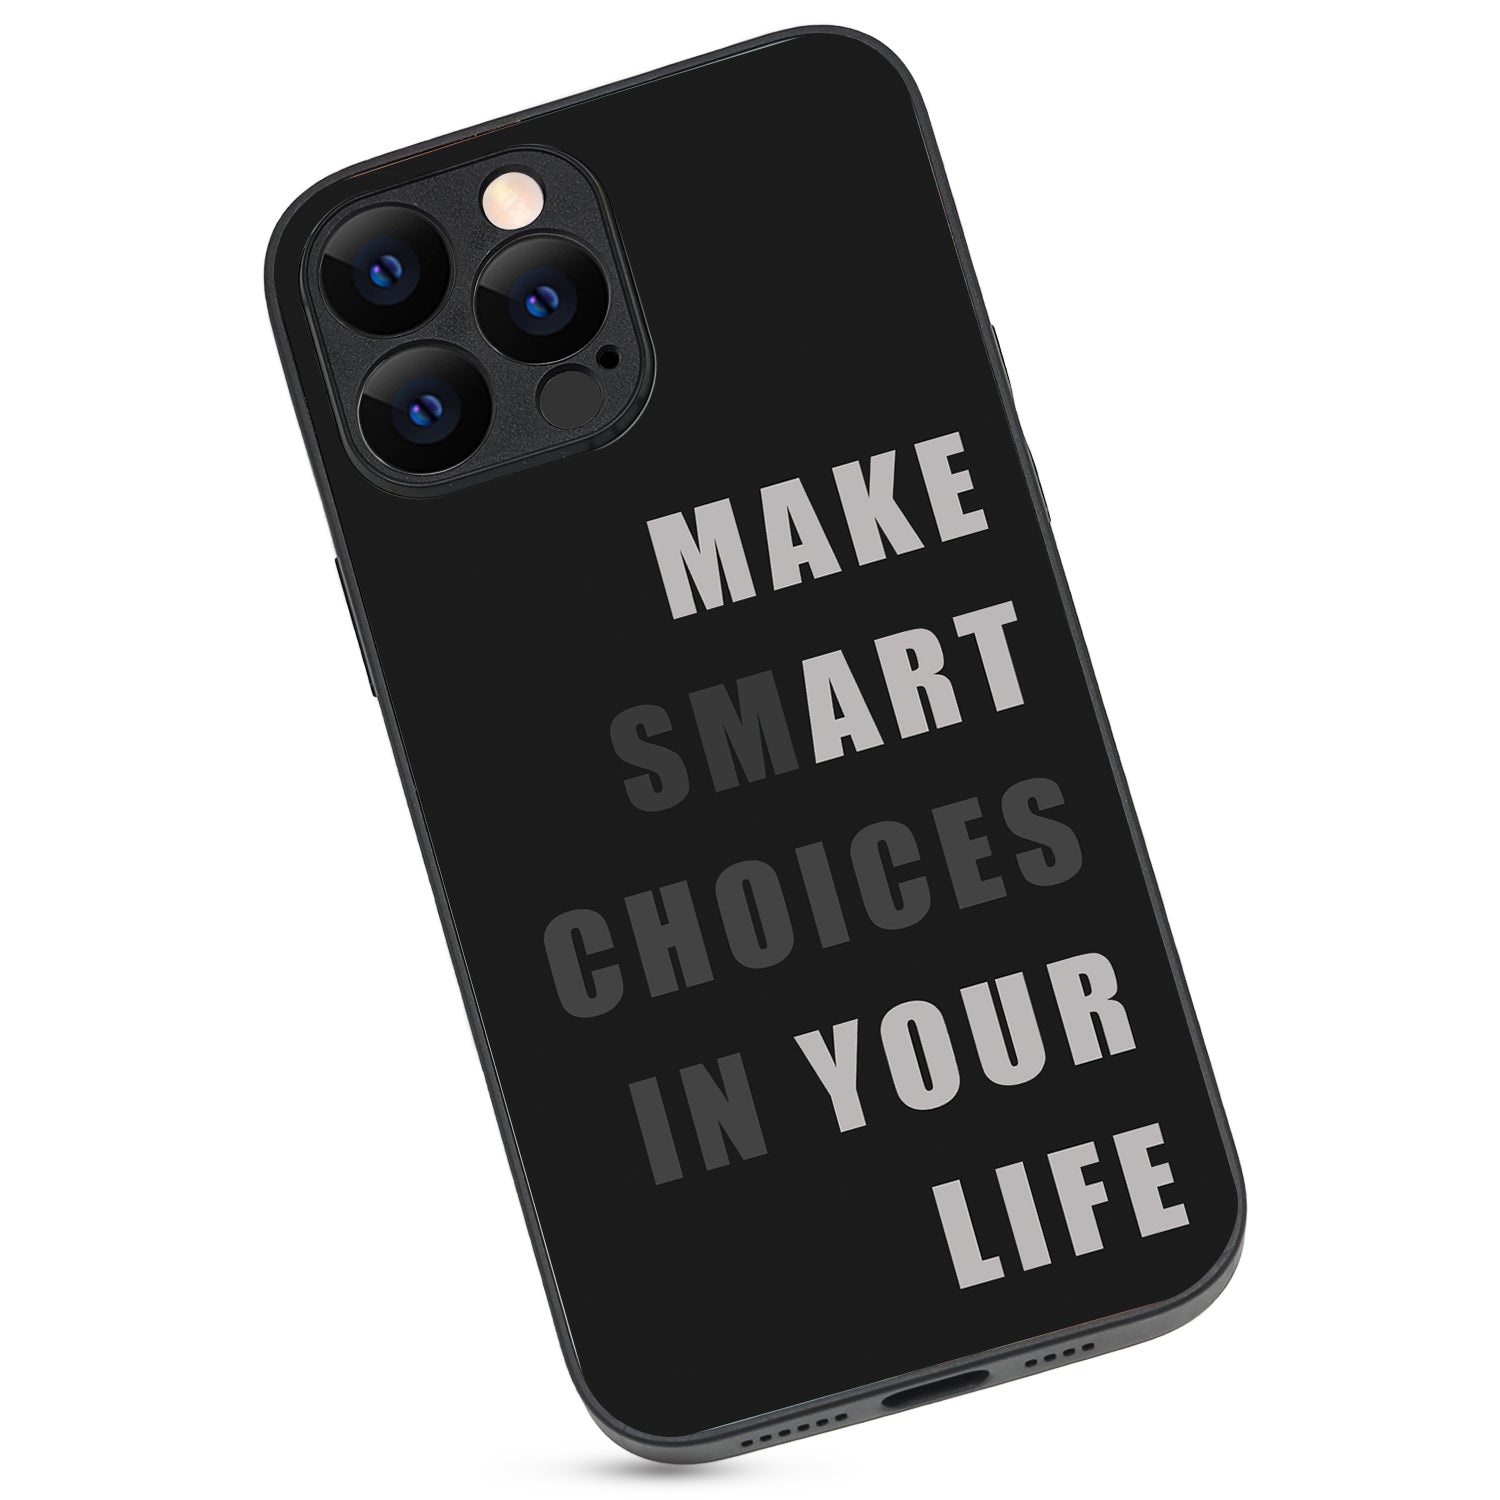 Smart Choices Motivational Quotes iPhone 13 Pro Max Case